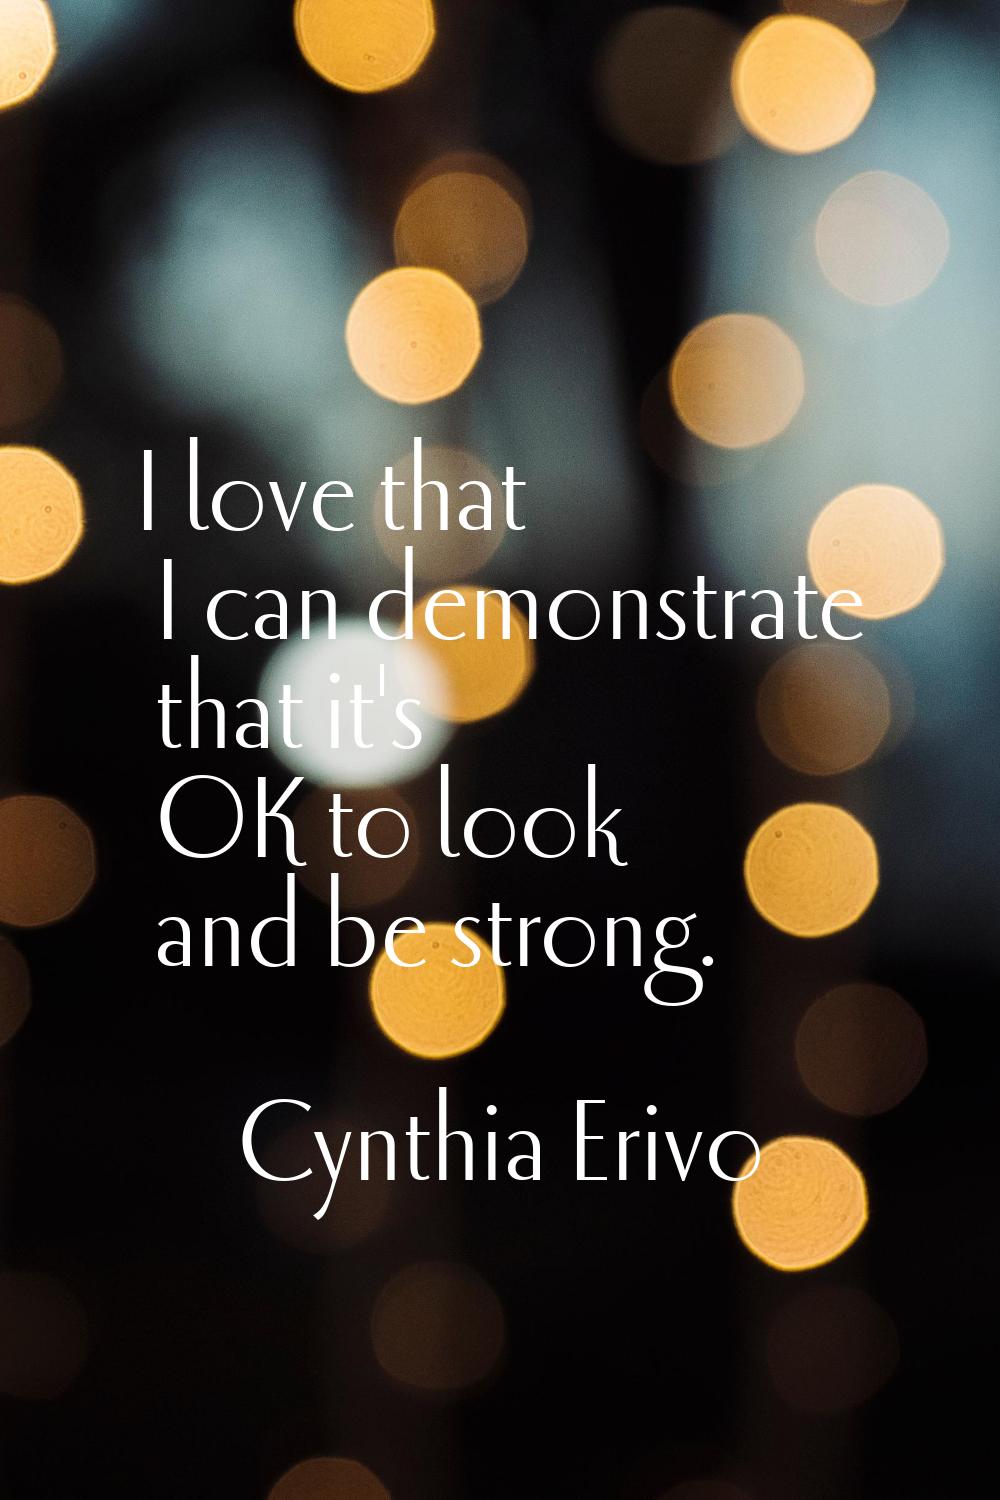 I love that I can demonstrate that it's OK to look and be strong.